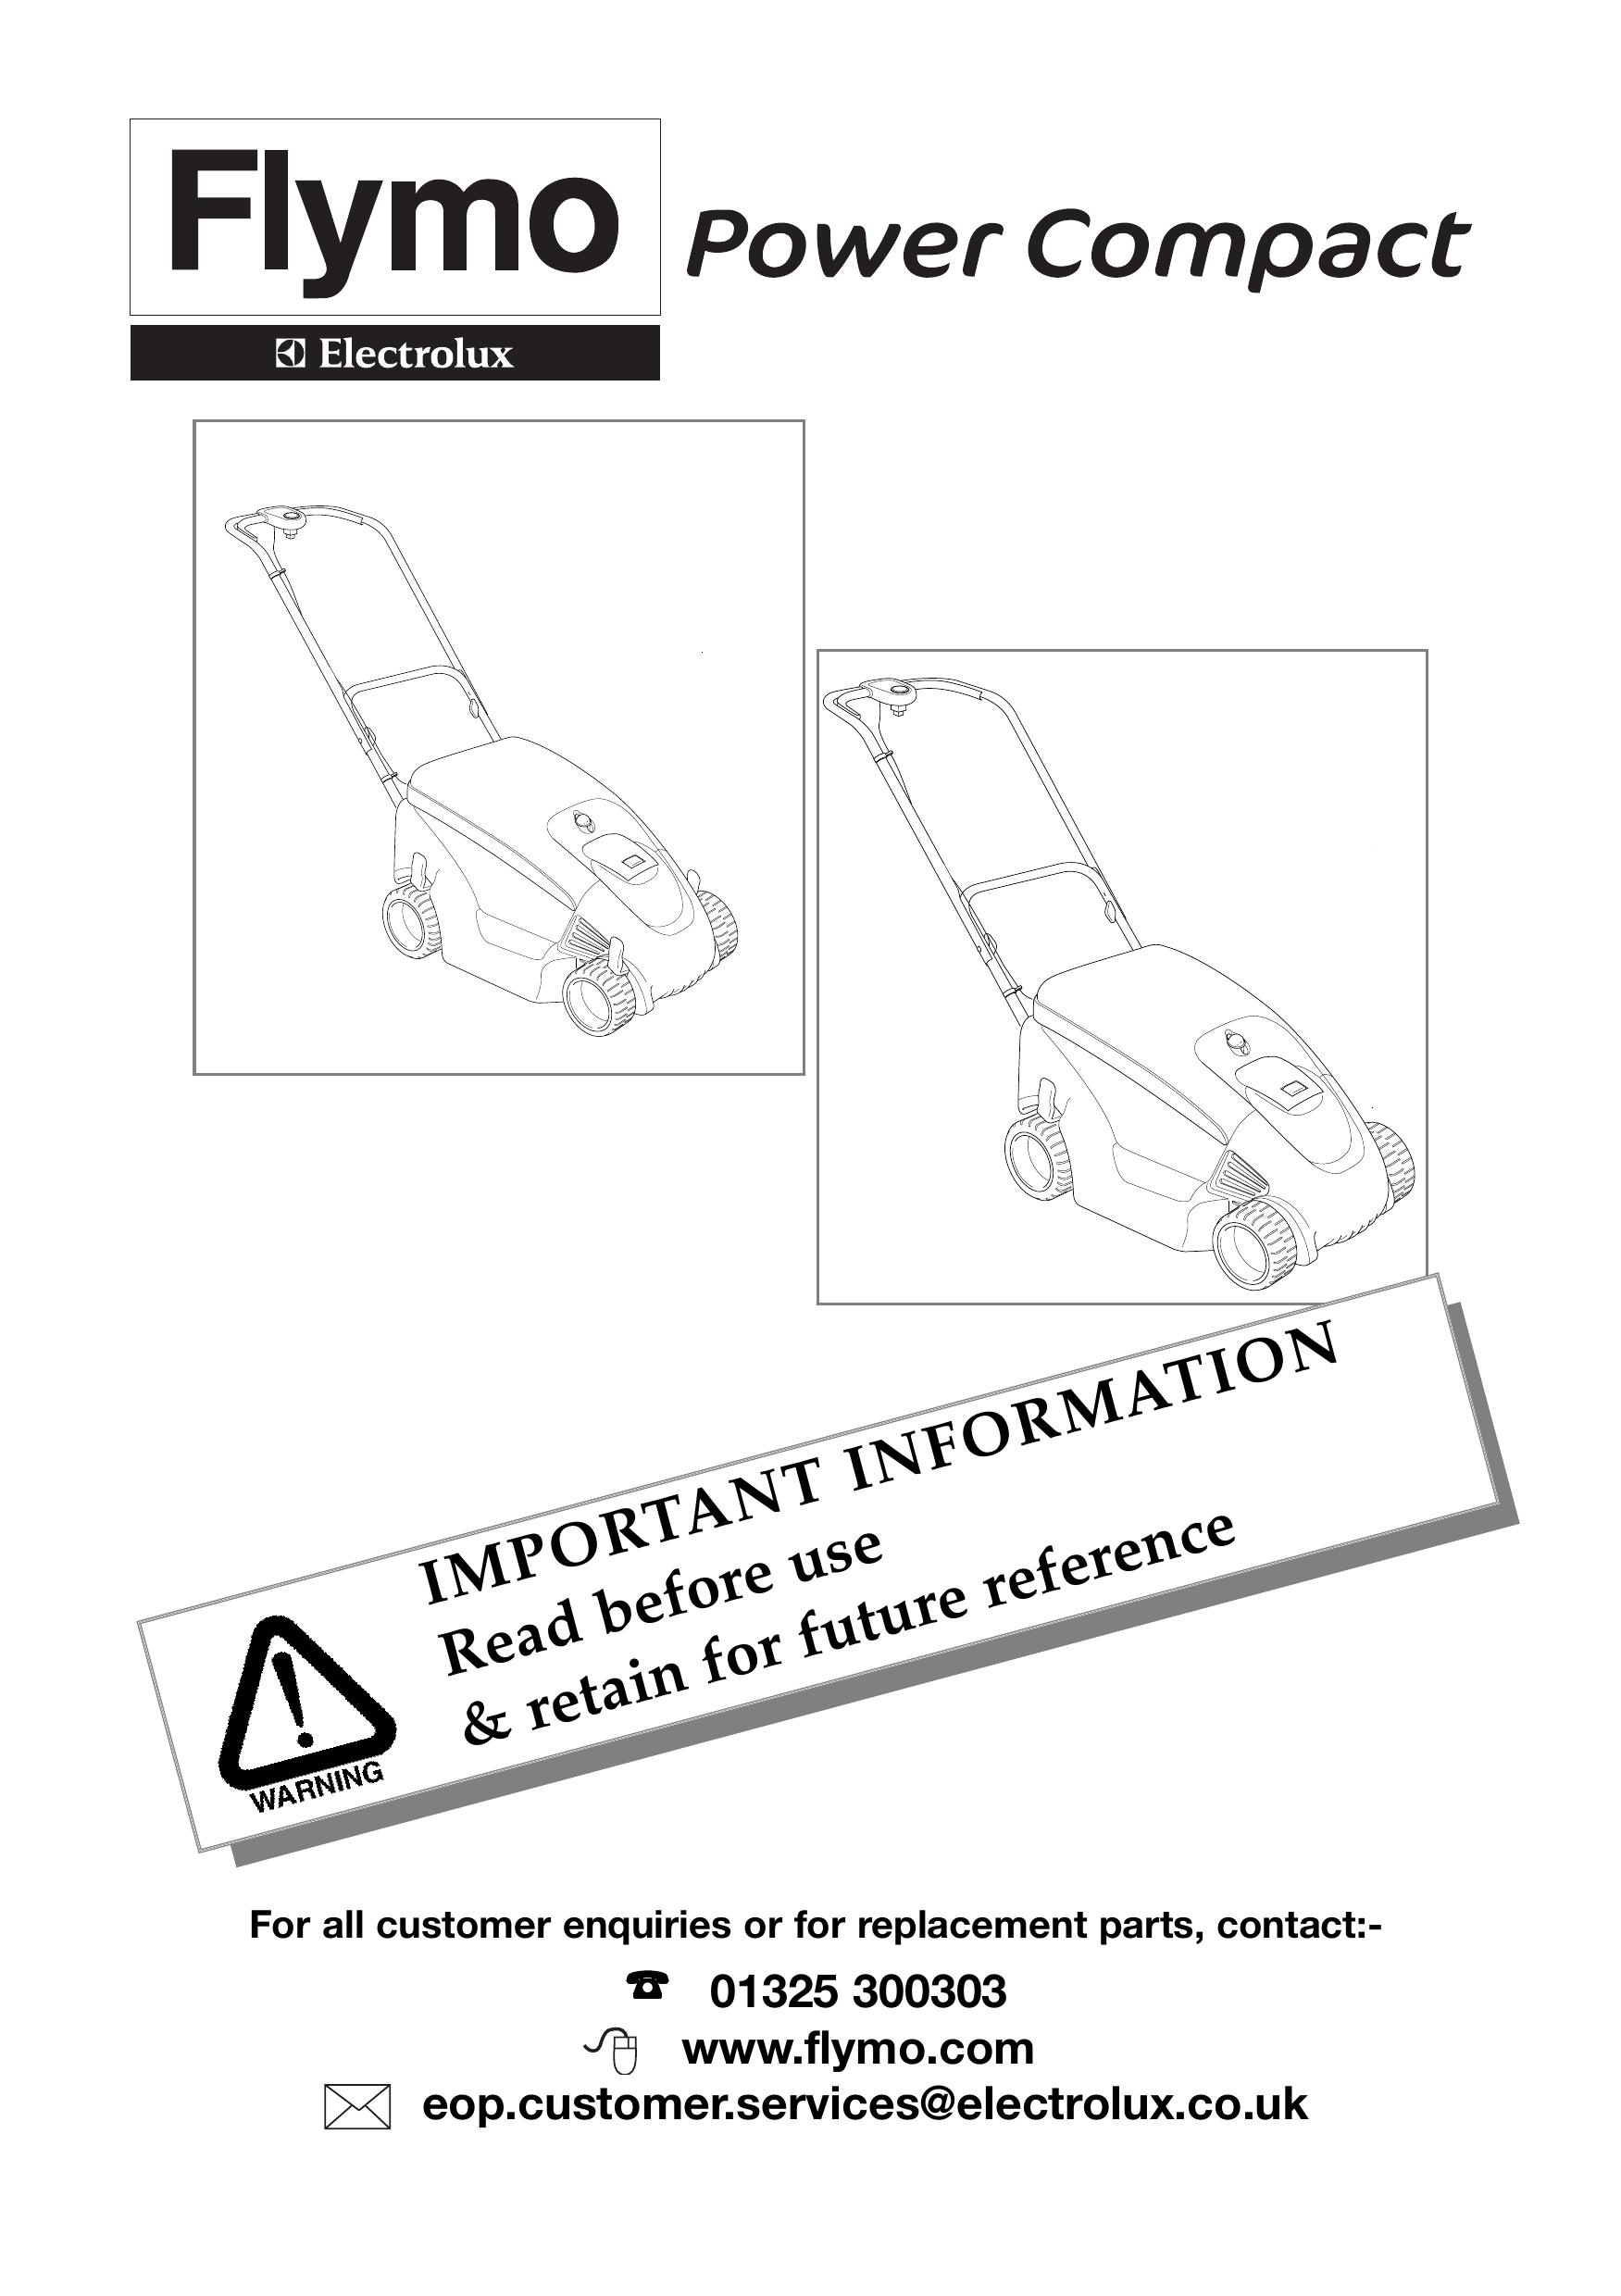 Flymo Power Compact Lawn Mower User Manual